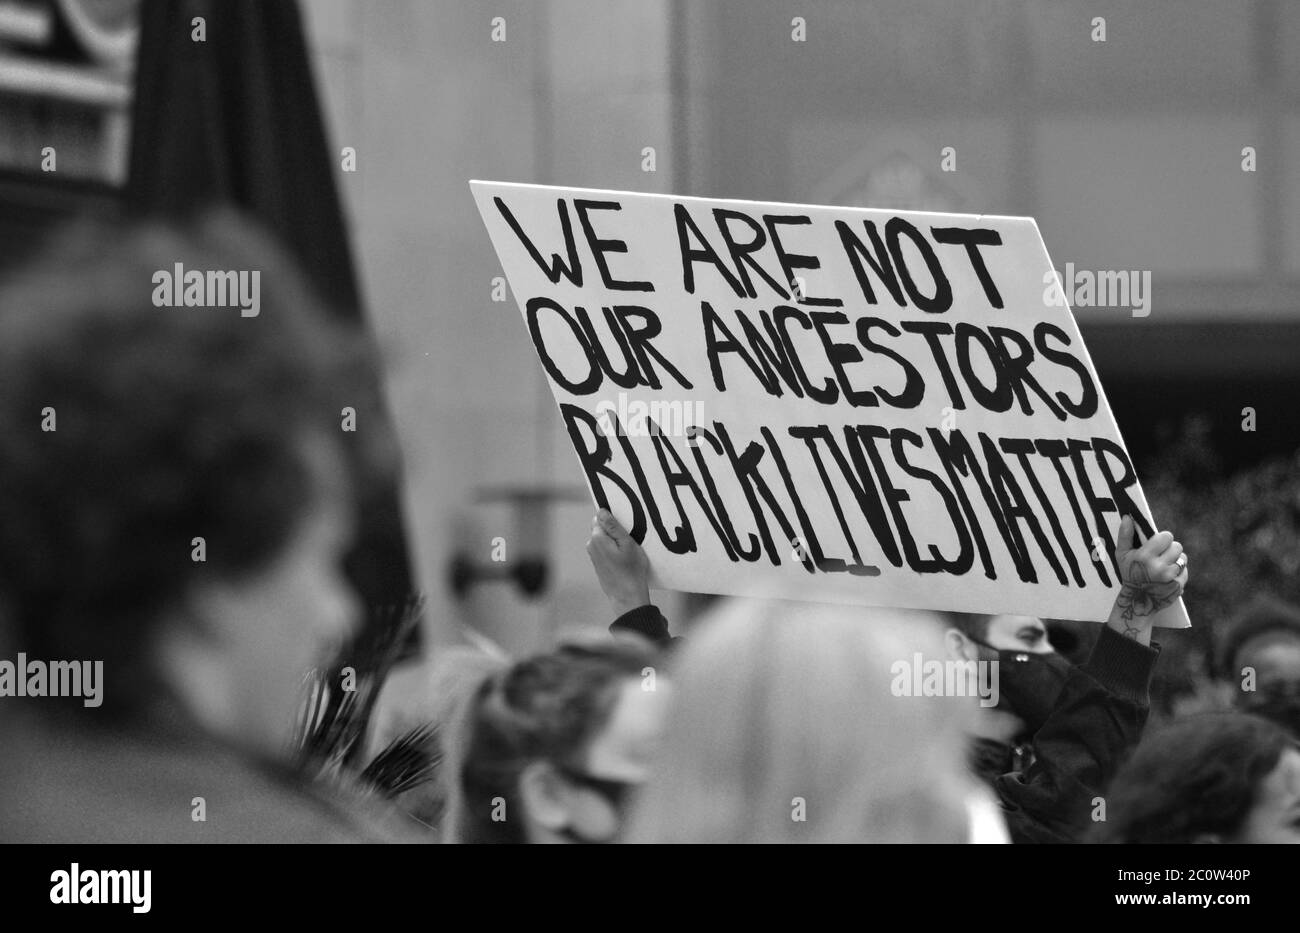 A banner being held up at a British Black Lives Matter protest in 2020 that reads 'We Are Not Our Ancestors Black Lives Matter' Stock Photo